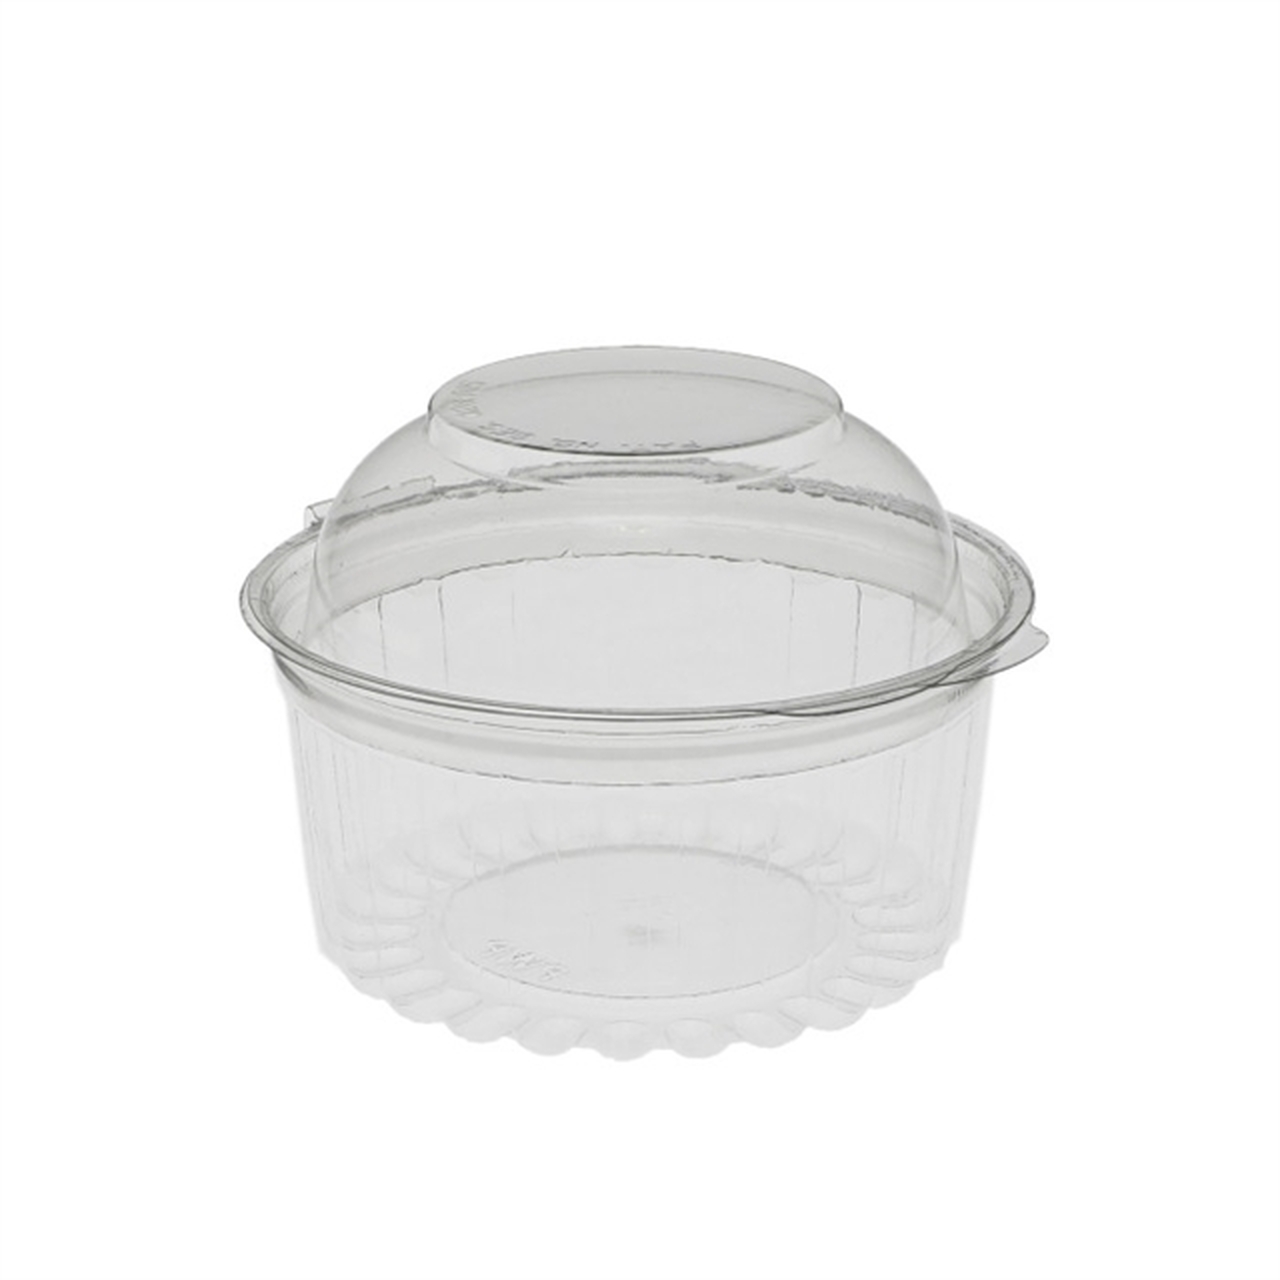 Pactiv 12oz Sho-Bowl Round Clear With Dome Lid 10845 250/case